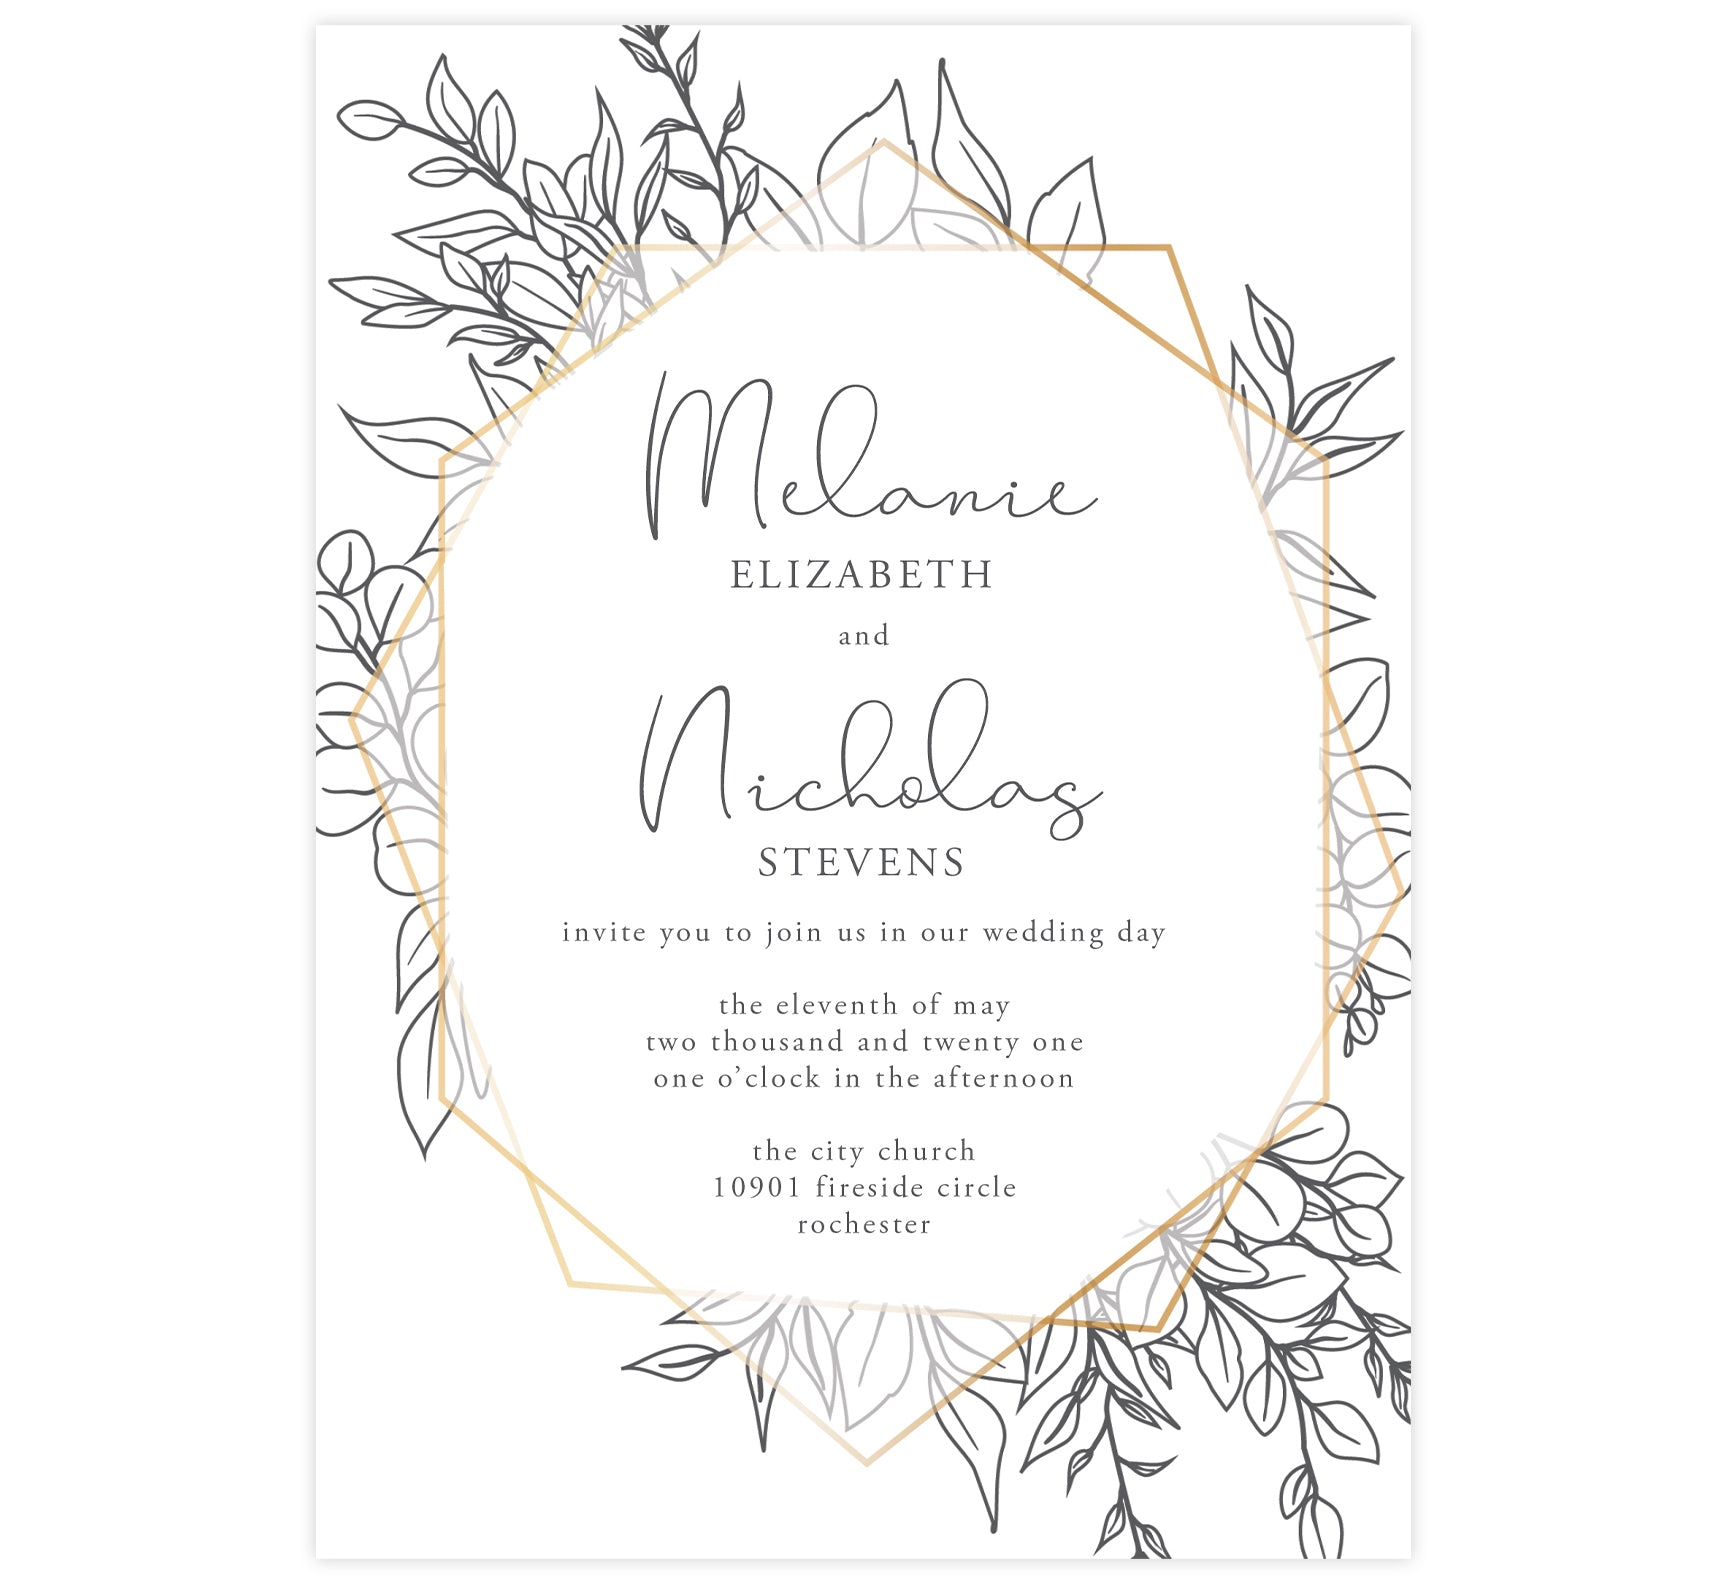 Hand Drawn Frame Wedding Invitation; white background with gold geometric frame and black hand drawn greenery around the frame